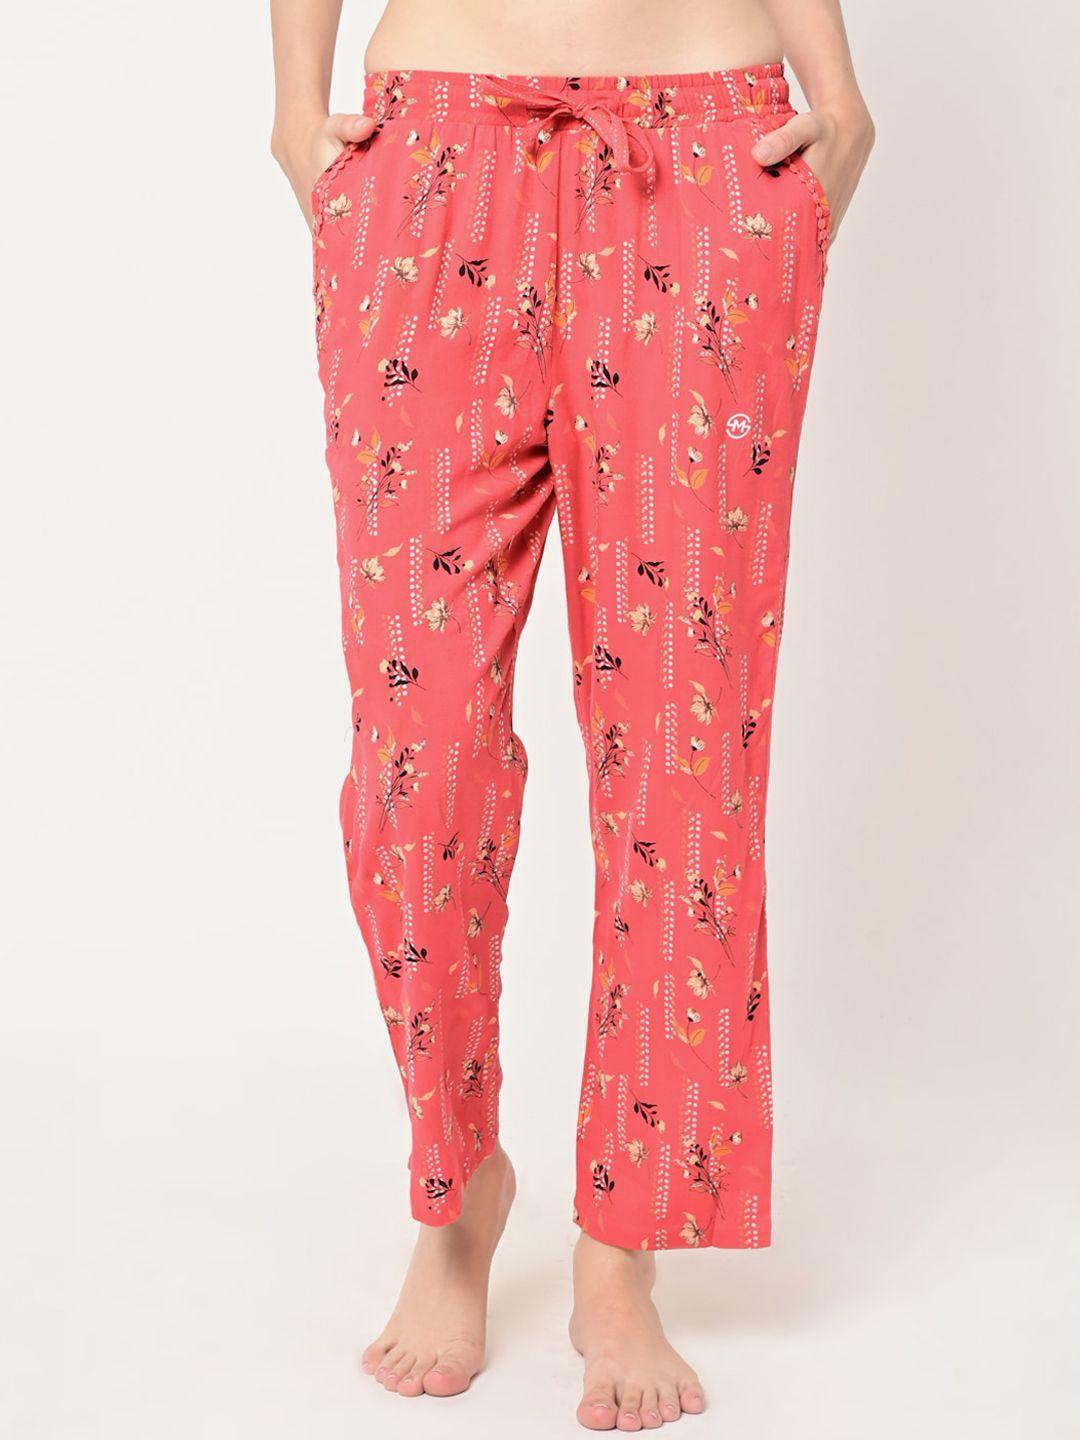 maysixty women floral printed lounge pants